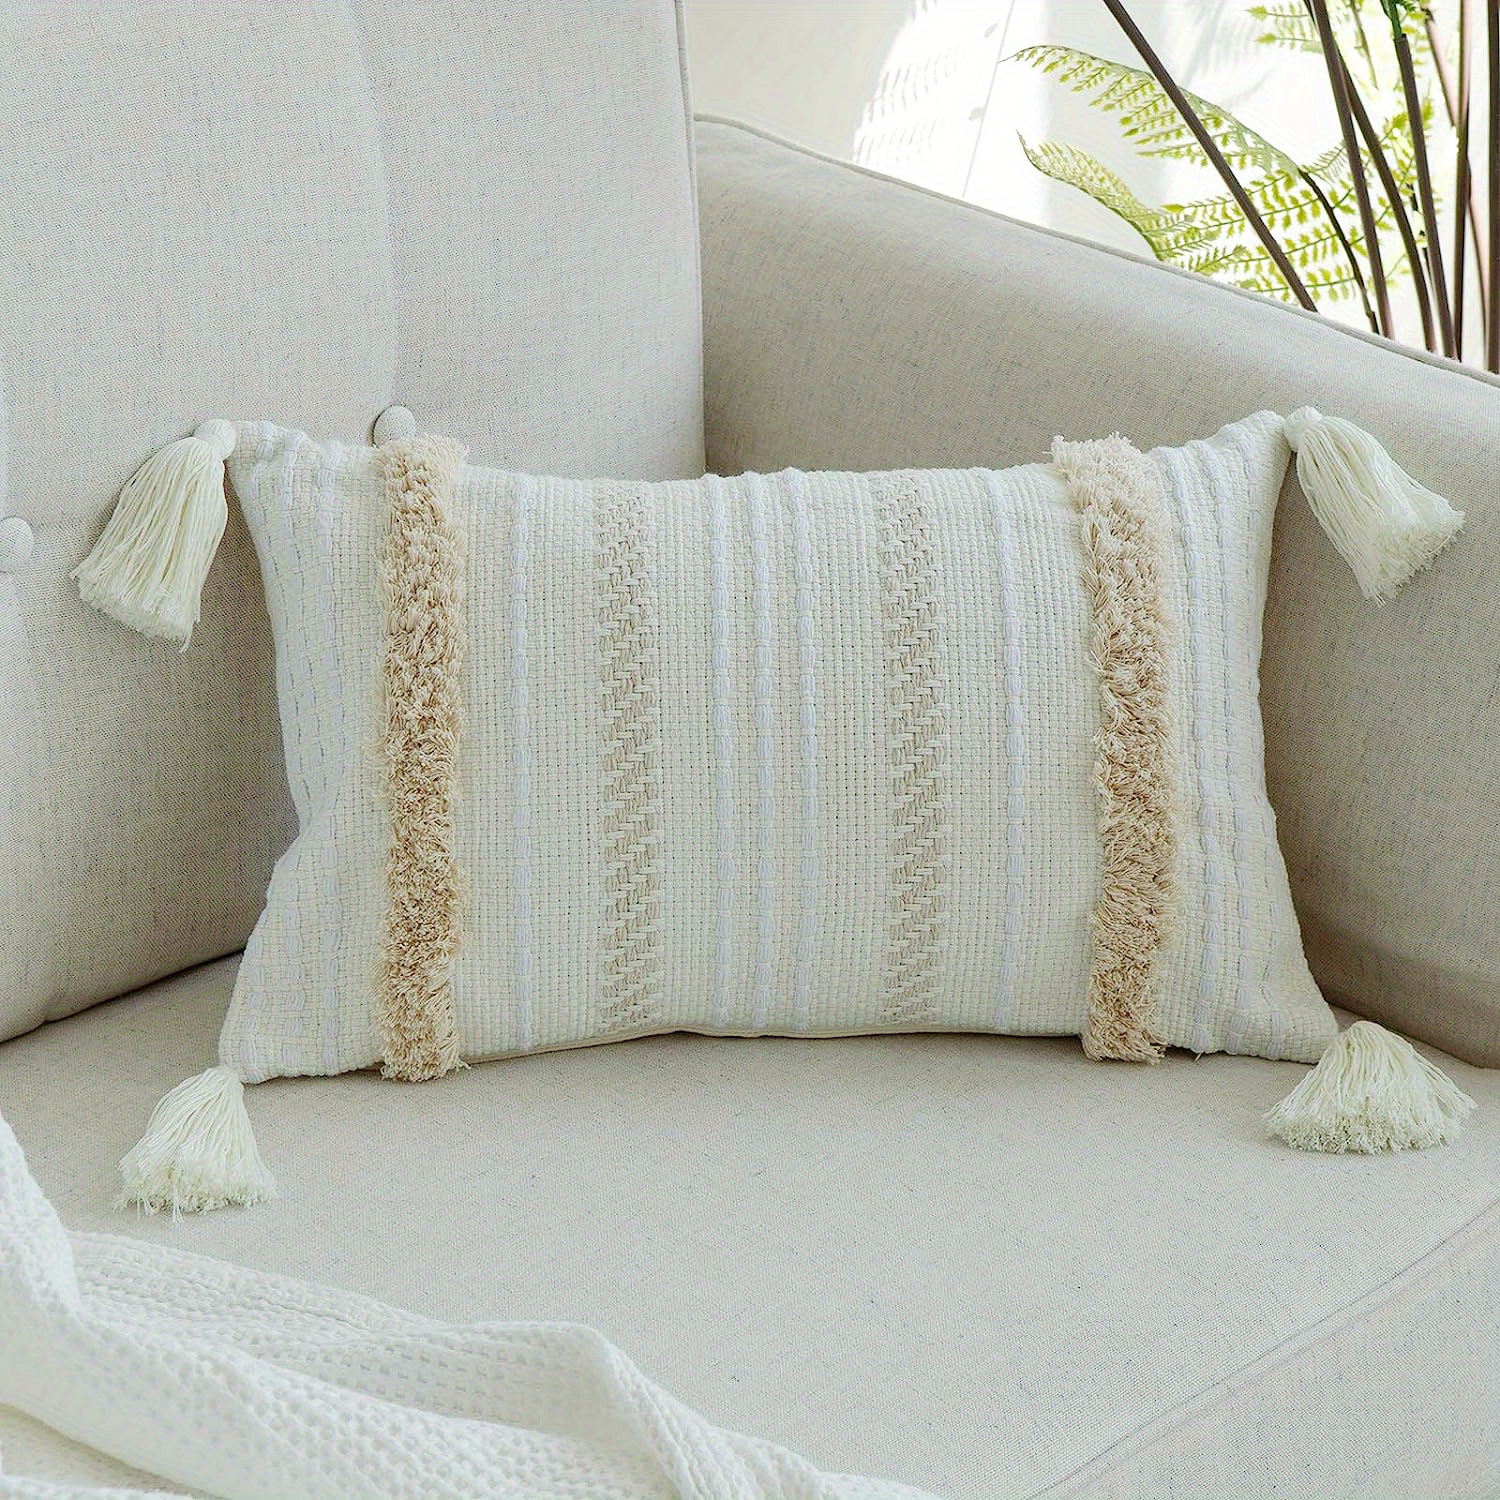 Boho Pillow Covers 18x18 inch, Neutral Pillow Covers, White Throw Pillow  Covers, Sofa Pillow Covers, Farmhouse Decorative Pillow Covers, Woven  Tufted